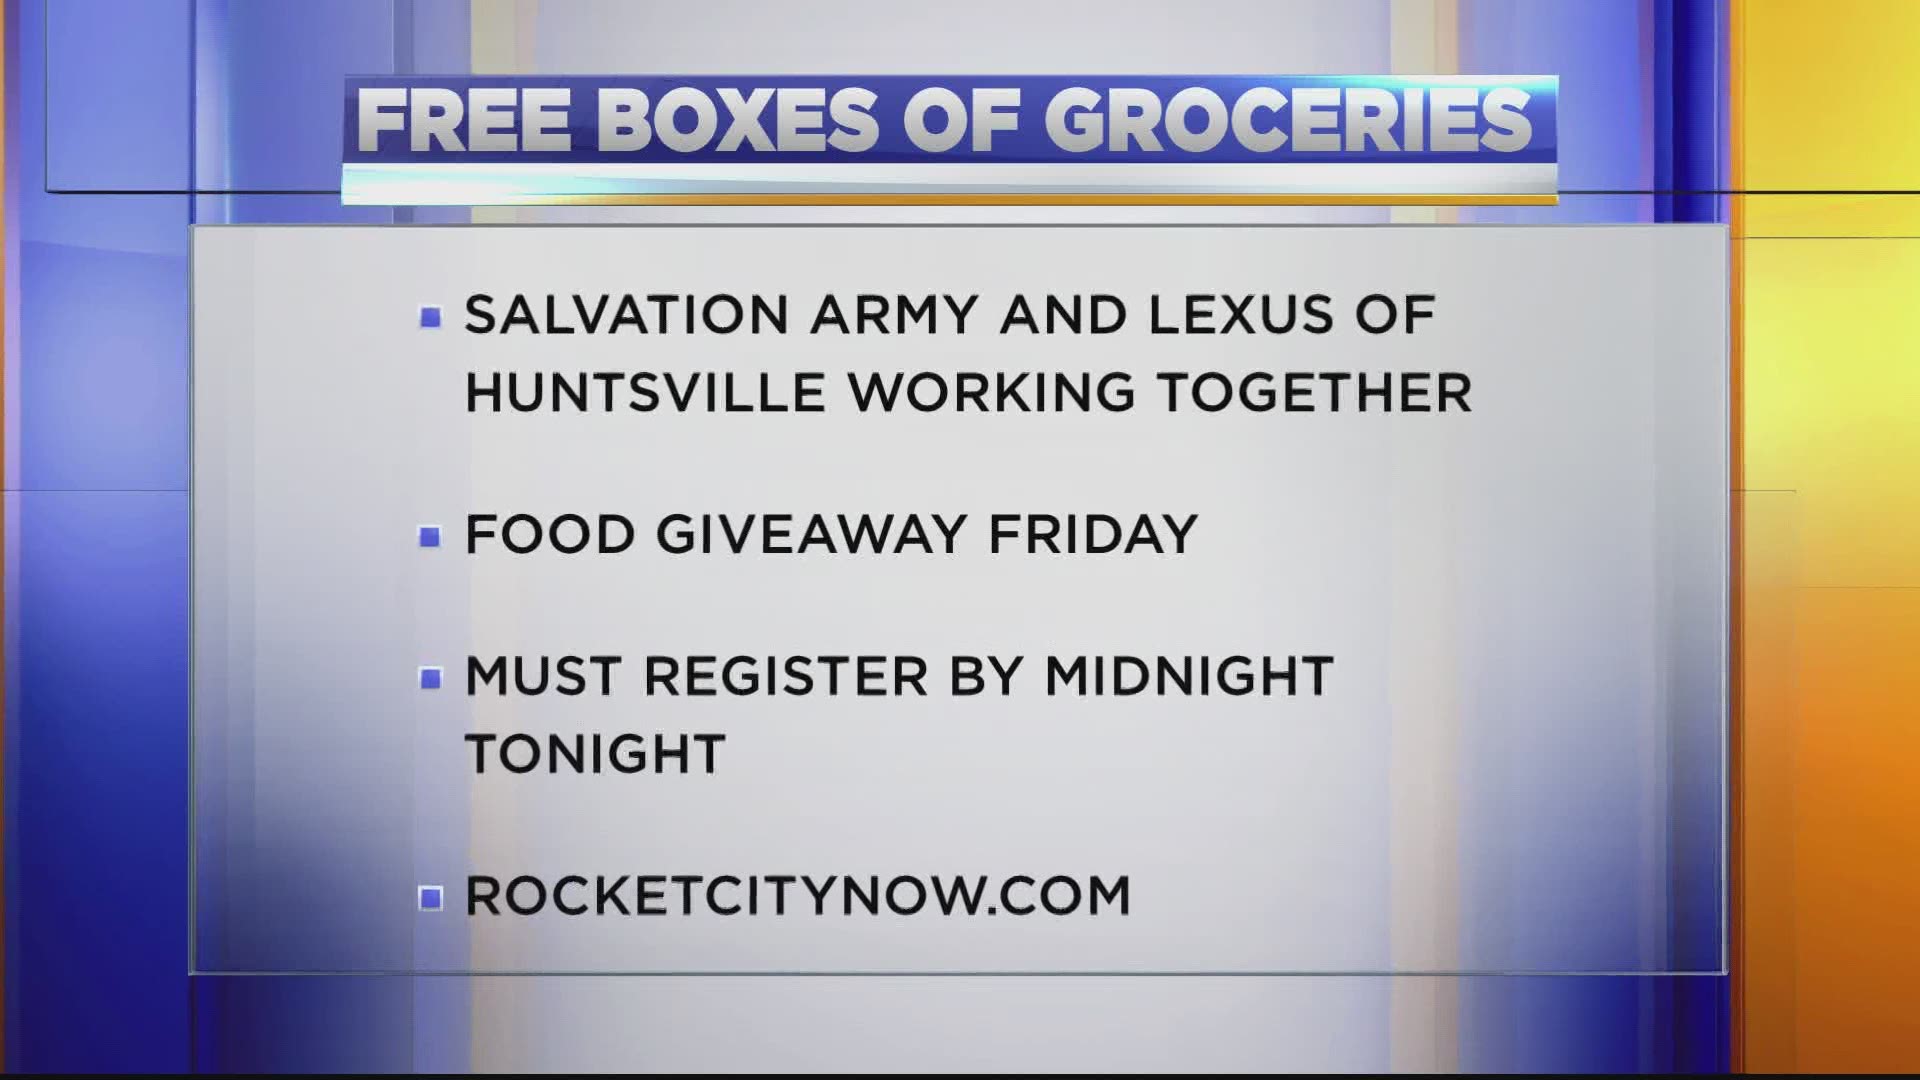 The Salvation Army and the Lexus of Huntsville are offering free grocery boxes for Madison County Alabama area families.